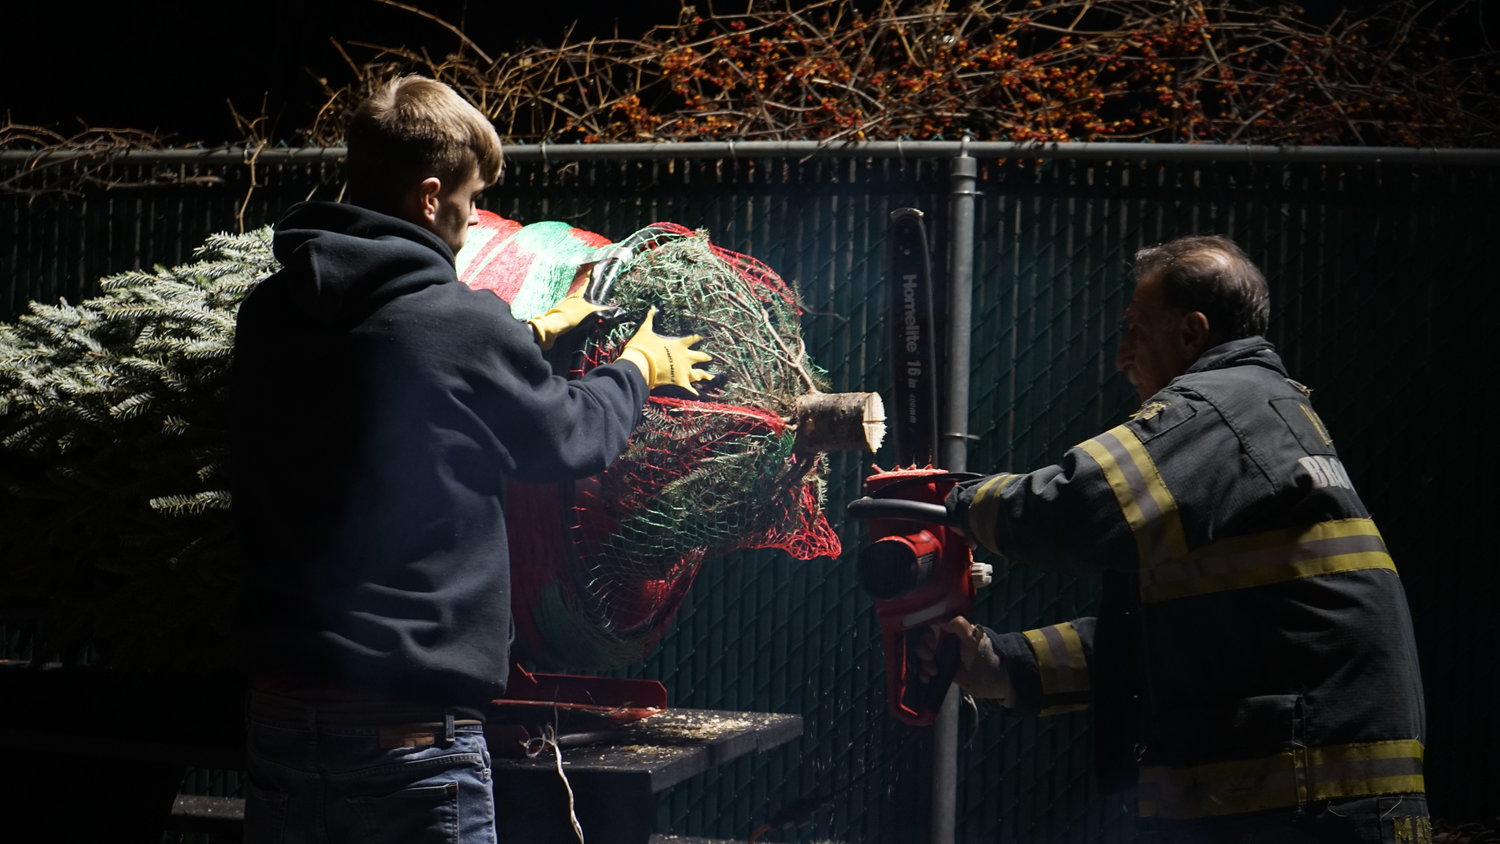 Firefighters Sean McBride, left, and Ronny Mastrangelo readied a tree for sale.